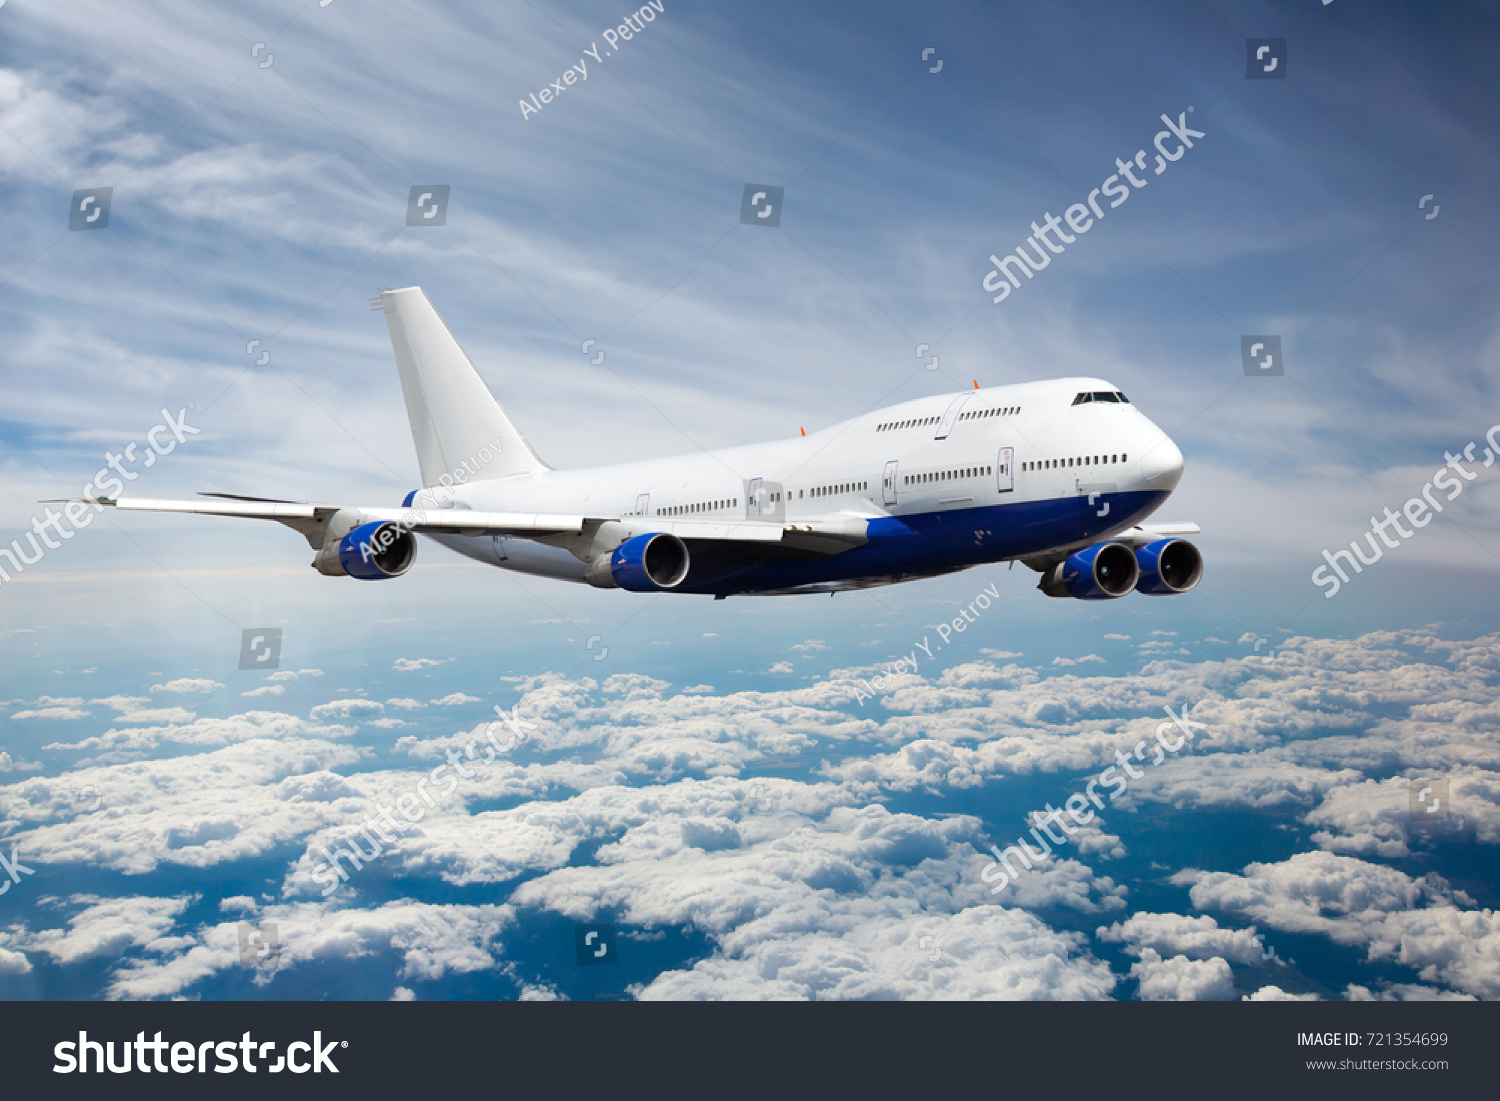 Passenger jet plane in the sky. Airplane flies high above the clouds. #721354699